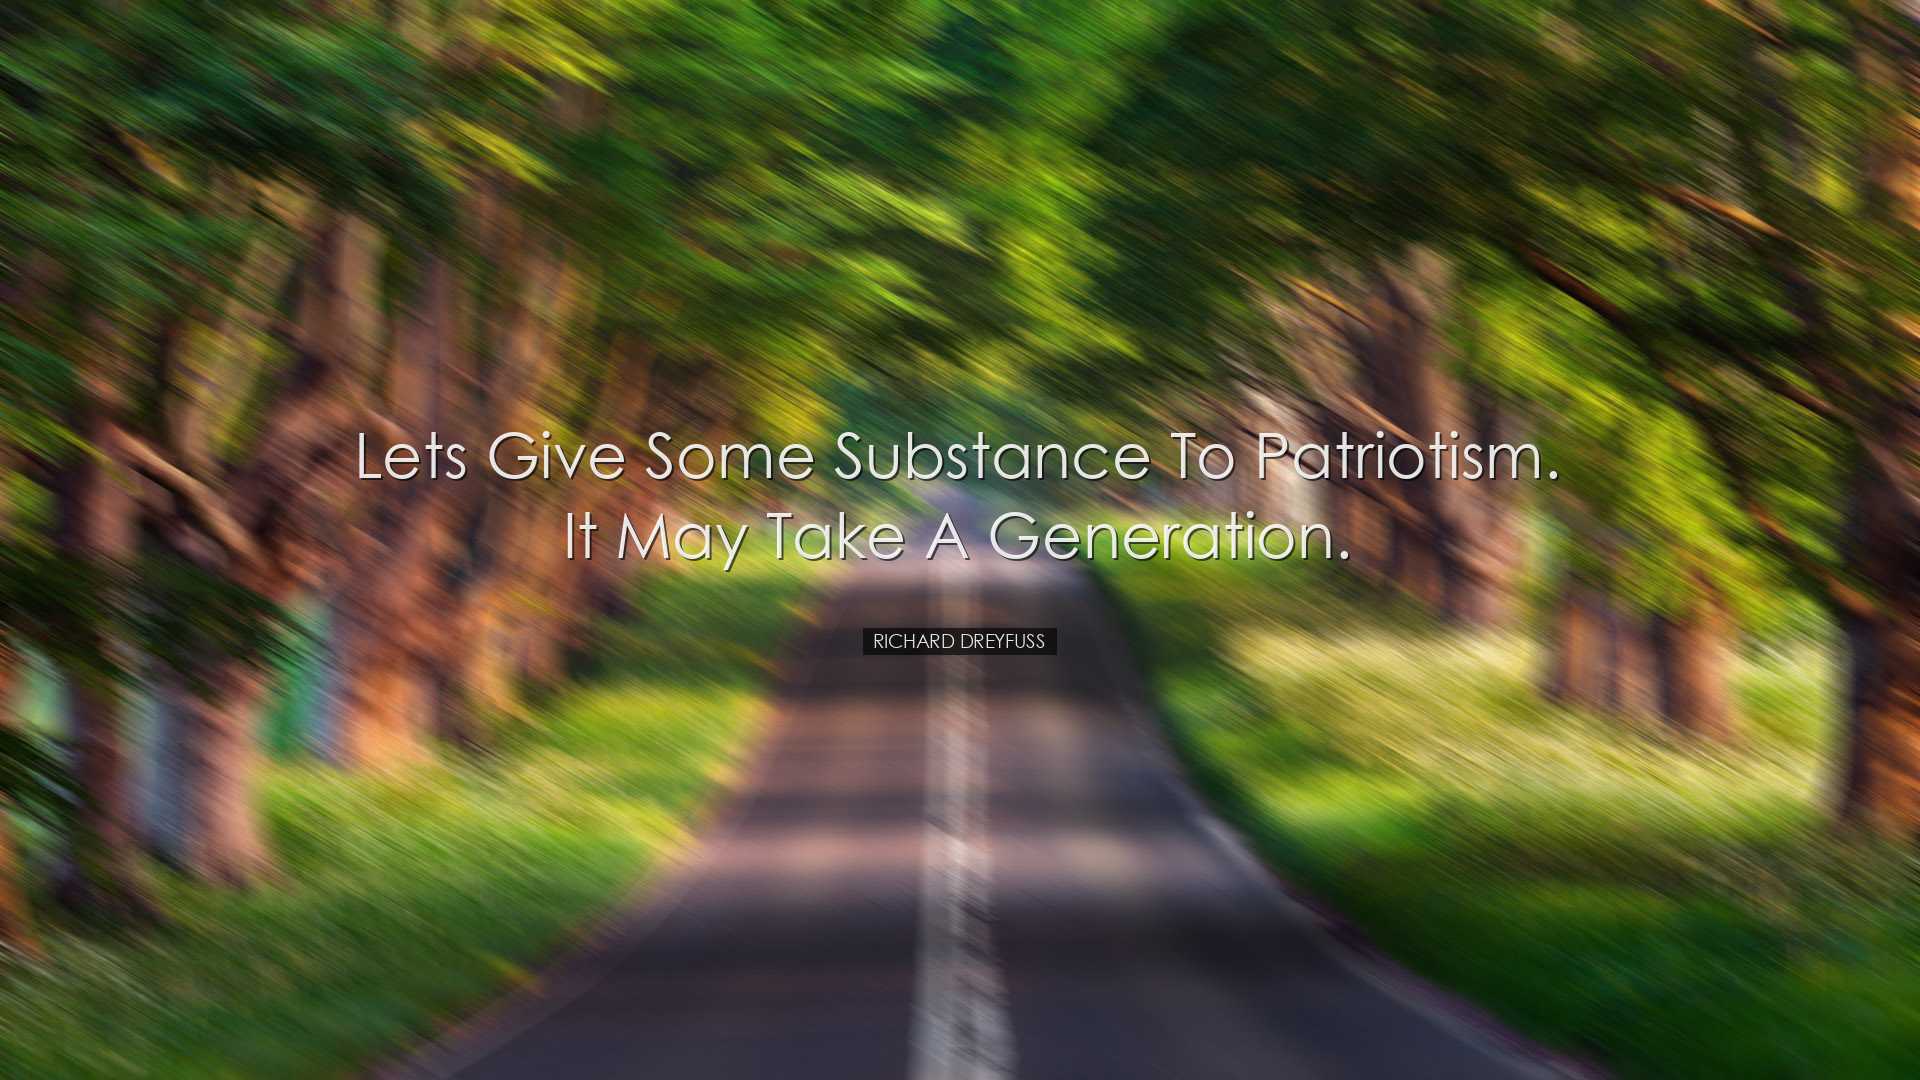 Lets give some substance to patriotism. It may take a generation.